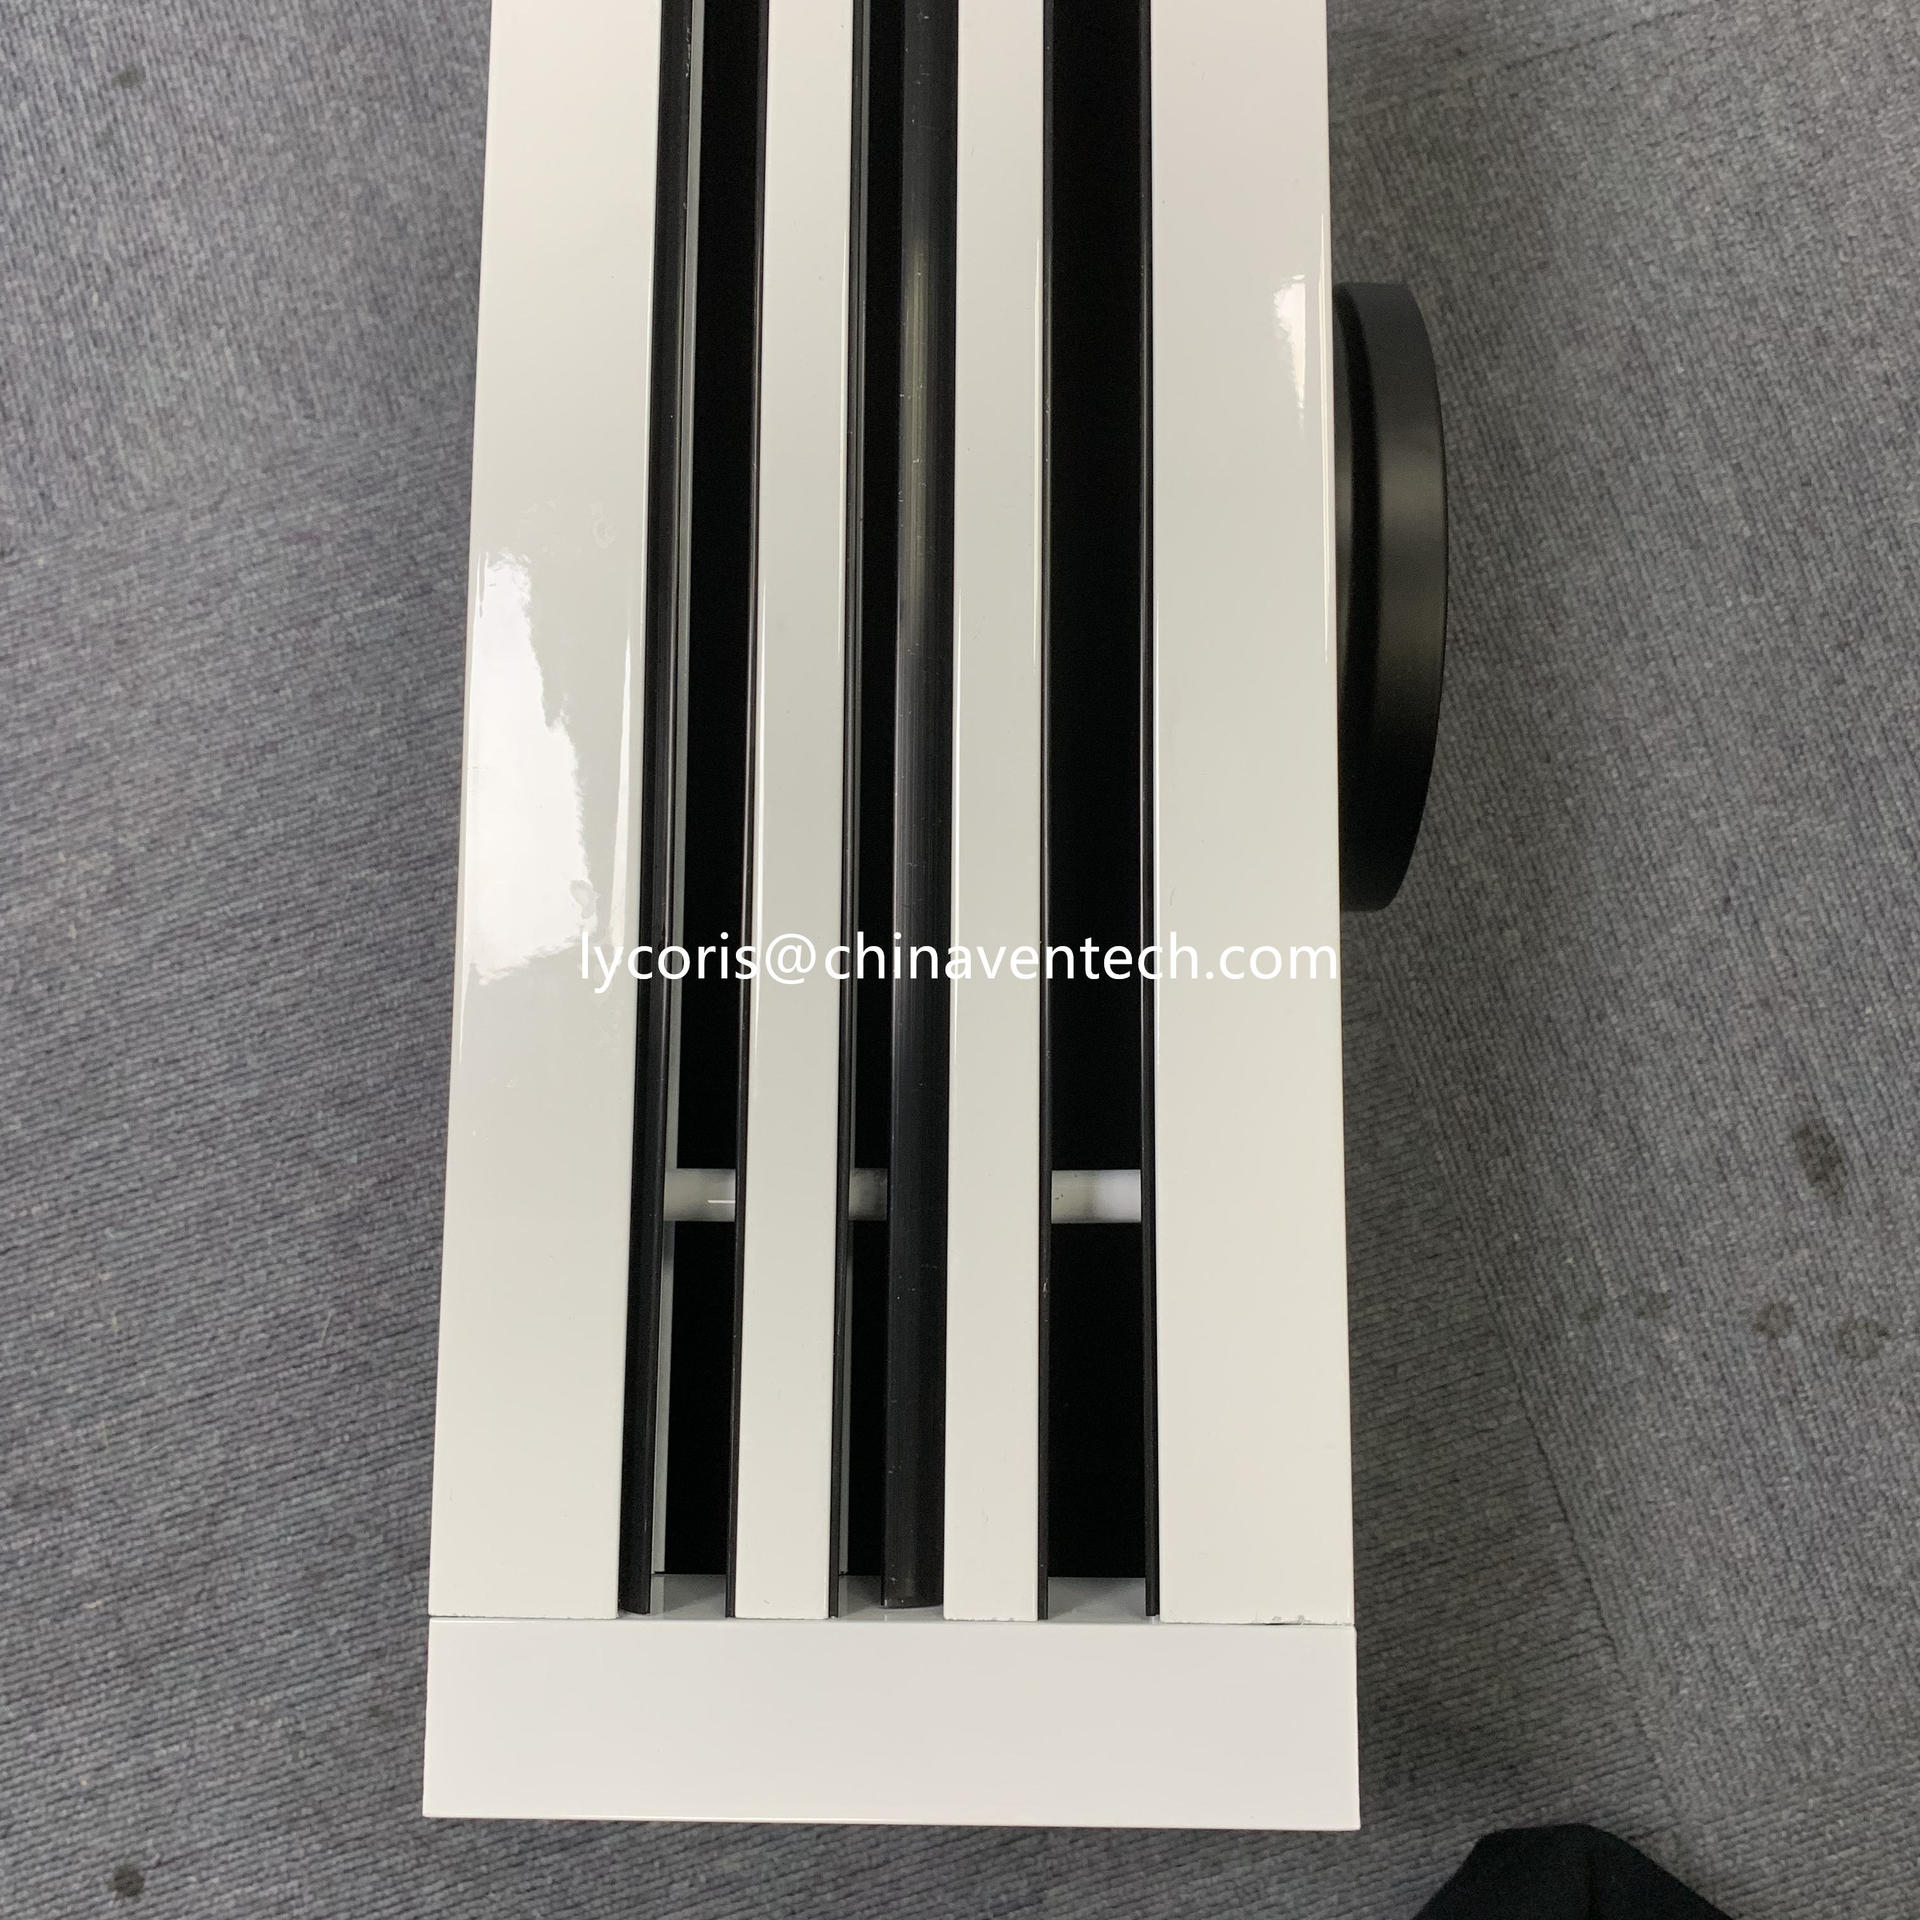 Hot Selling Ceiling Linear Slot Diffuser Air Aluminum Grille Plenum Box Adaptor Linear Slot Adjustable Blades Diffuser for HVAC